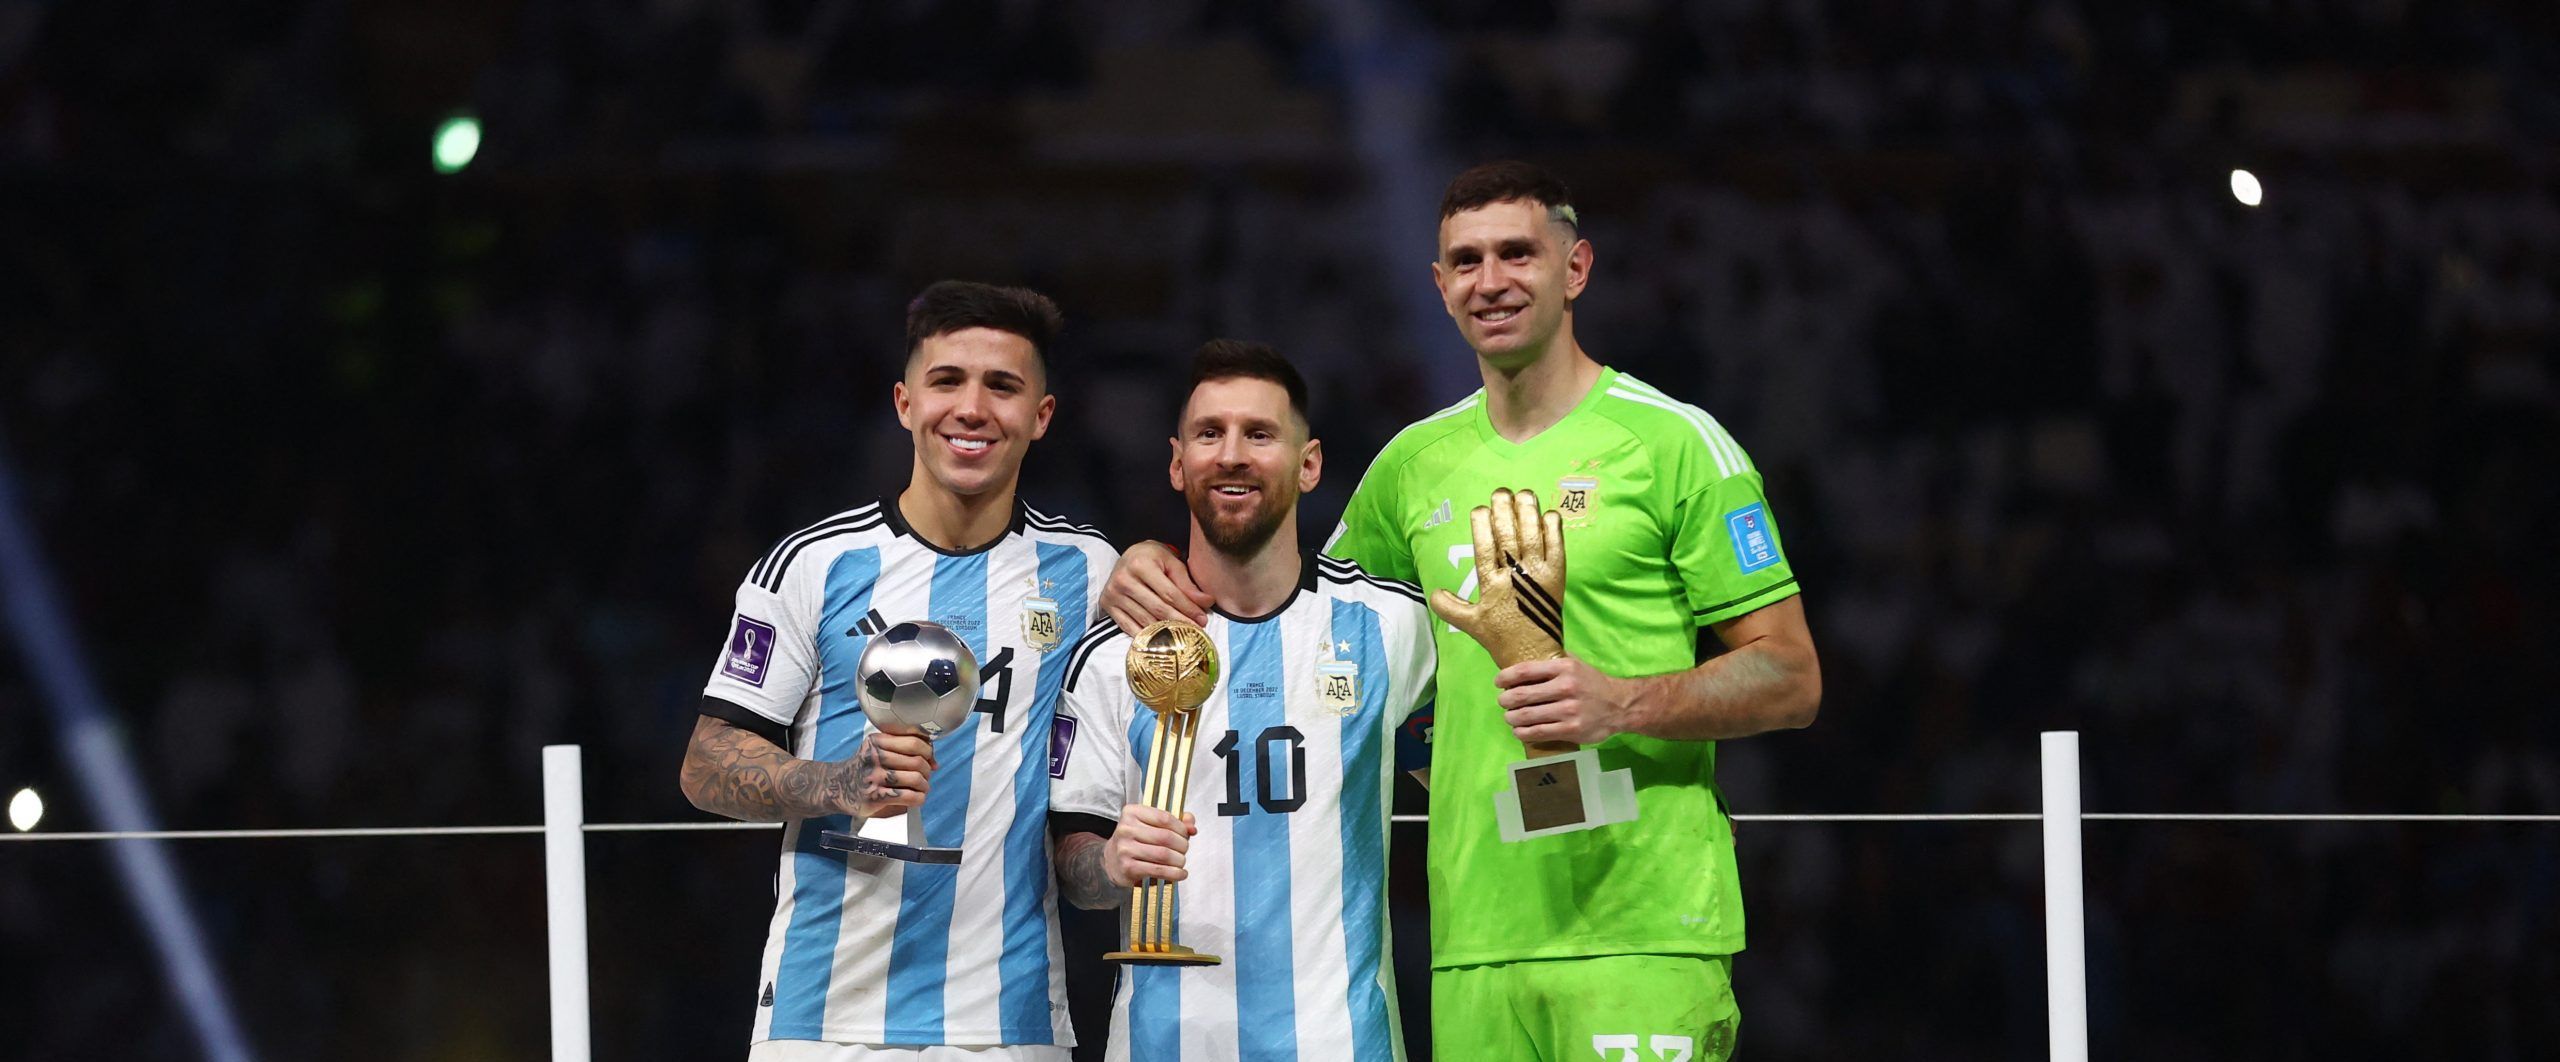 Soccer Football - FIFA World Cup Qatar 2022 - Final - Argentina v France - Lusail Stadium, Lusail, Qatar - December 18, 2022 Best Young Player winner Argentina's Enzo Fernandez, Golden Ball winner Argentina's Lionel Messi and Golden Glove winner Argentina's Emiliano Martinez pose with the trophies REUTERS/Carl Recine